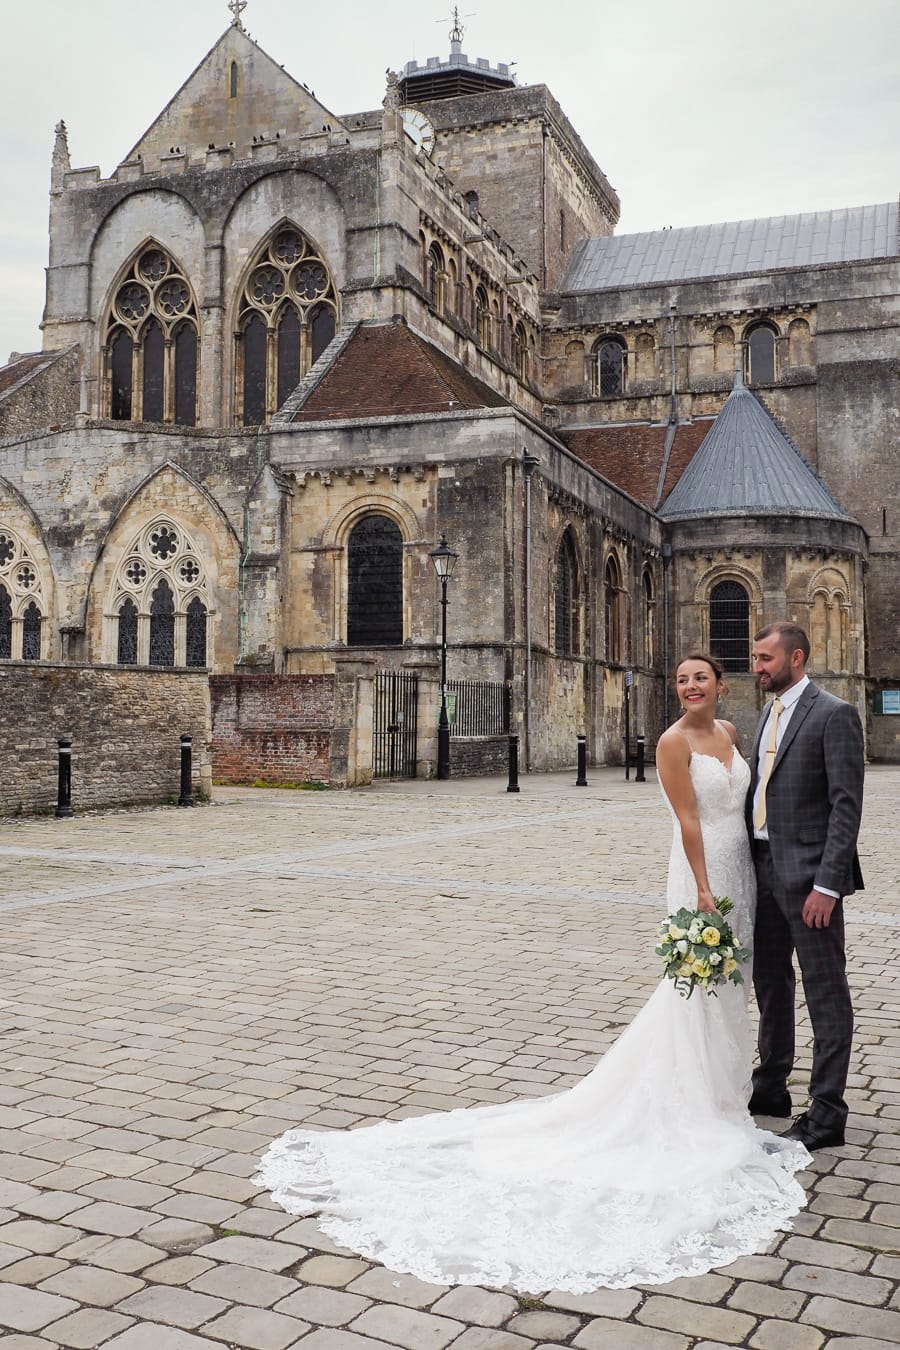 Romantic Romsey, olde worlde charm for a Hampshire wedding, with Dom Brenton Photography (15)